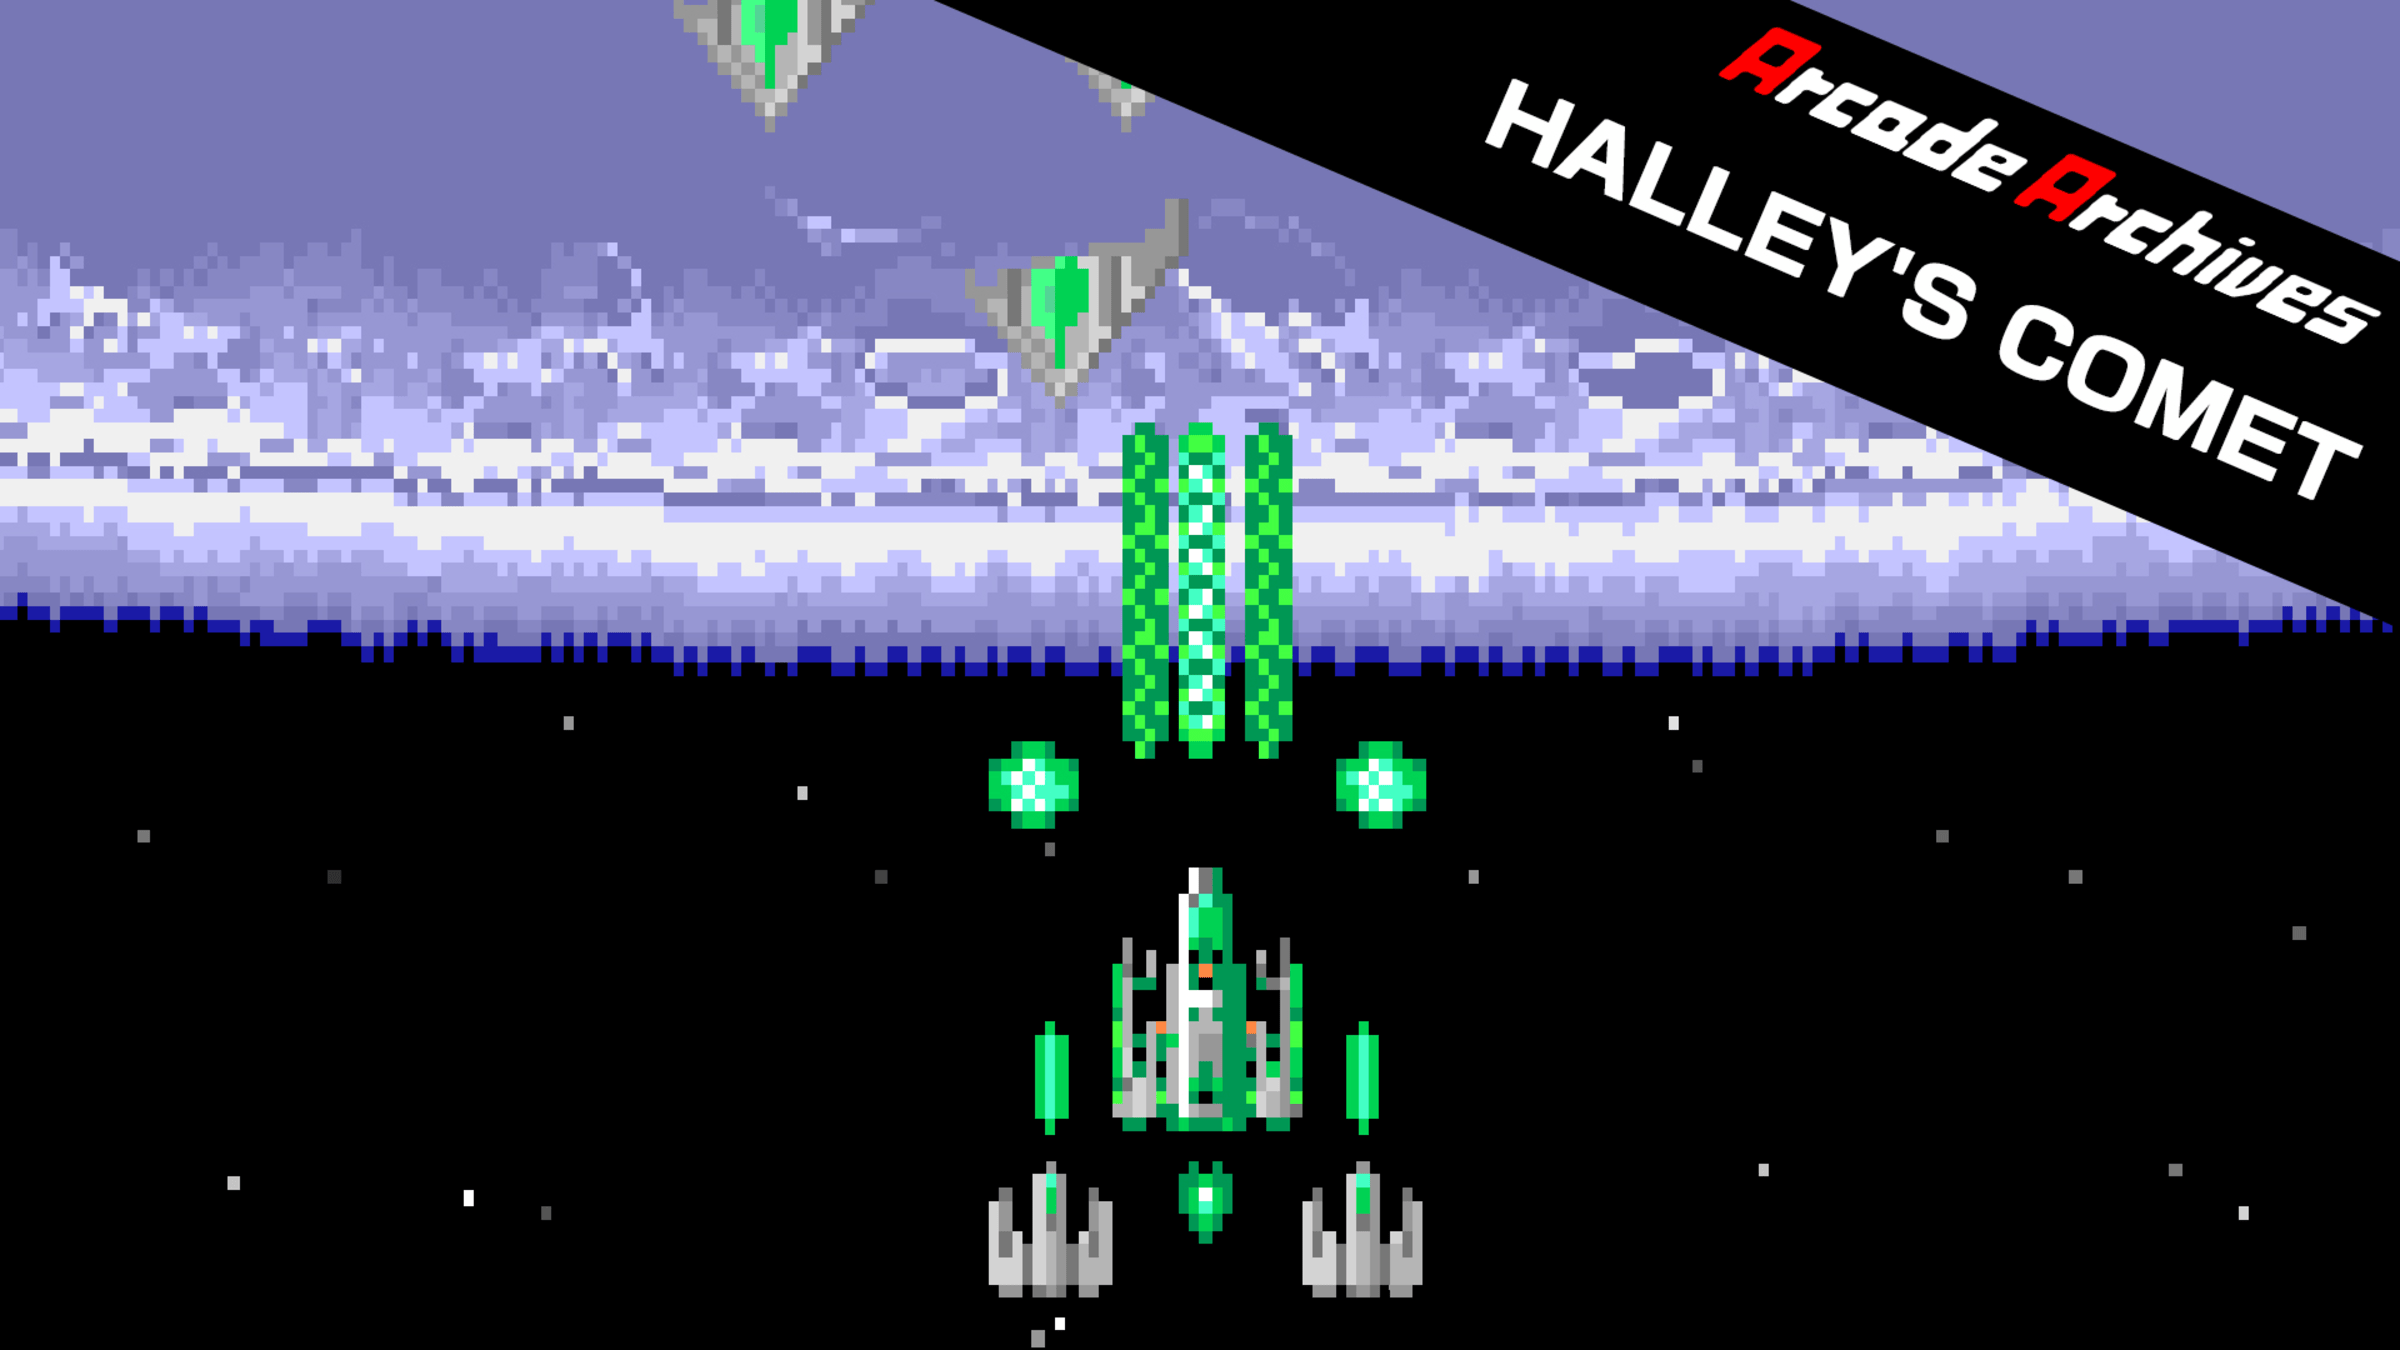 Arcade Archives HALLEYS COMET for Nintendo Switch